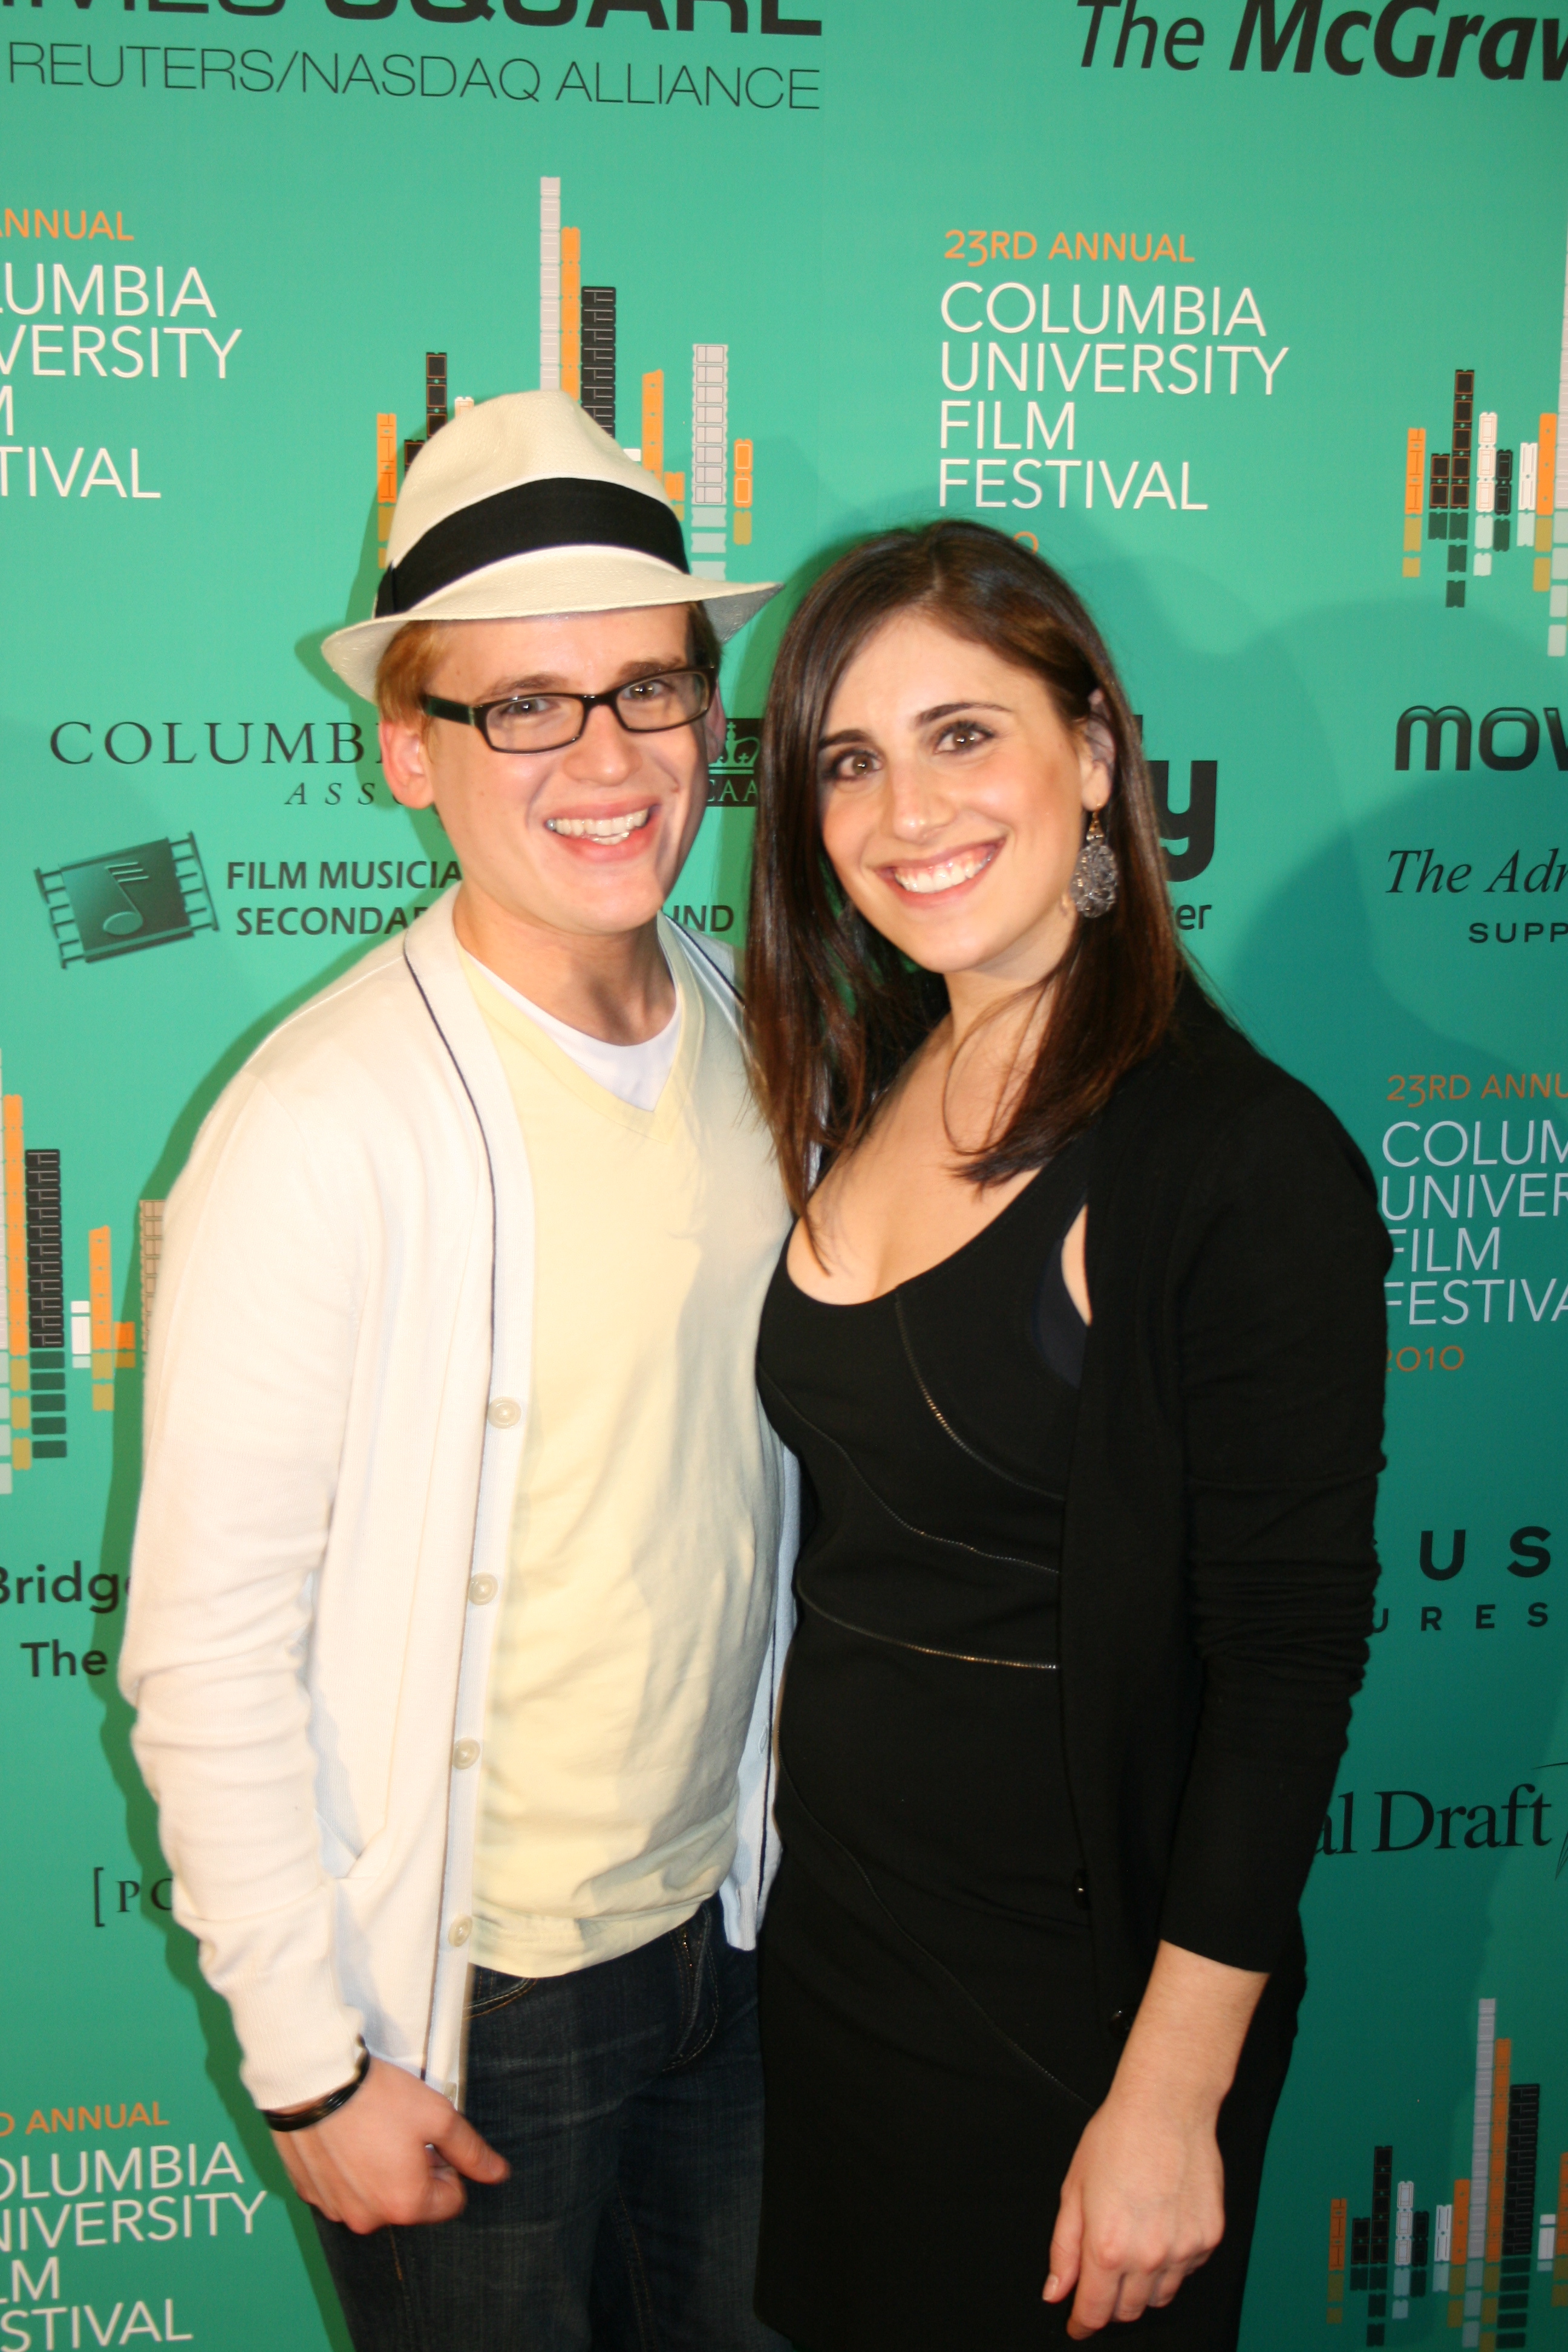 William Michael Harper and director Kate Nexon at the 2010 Columbia University Film Festival Closing Night Party.